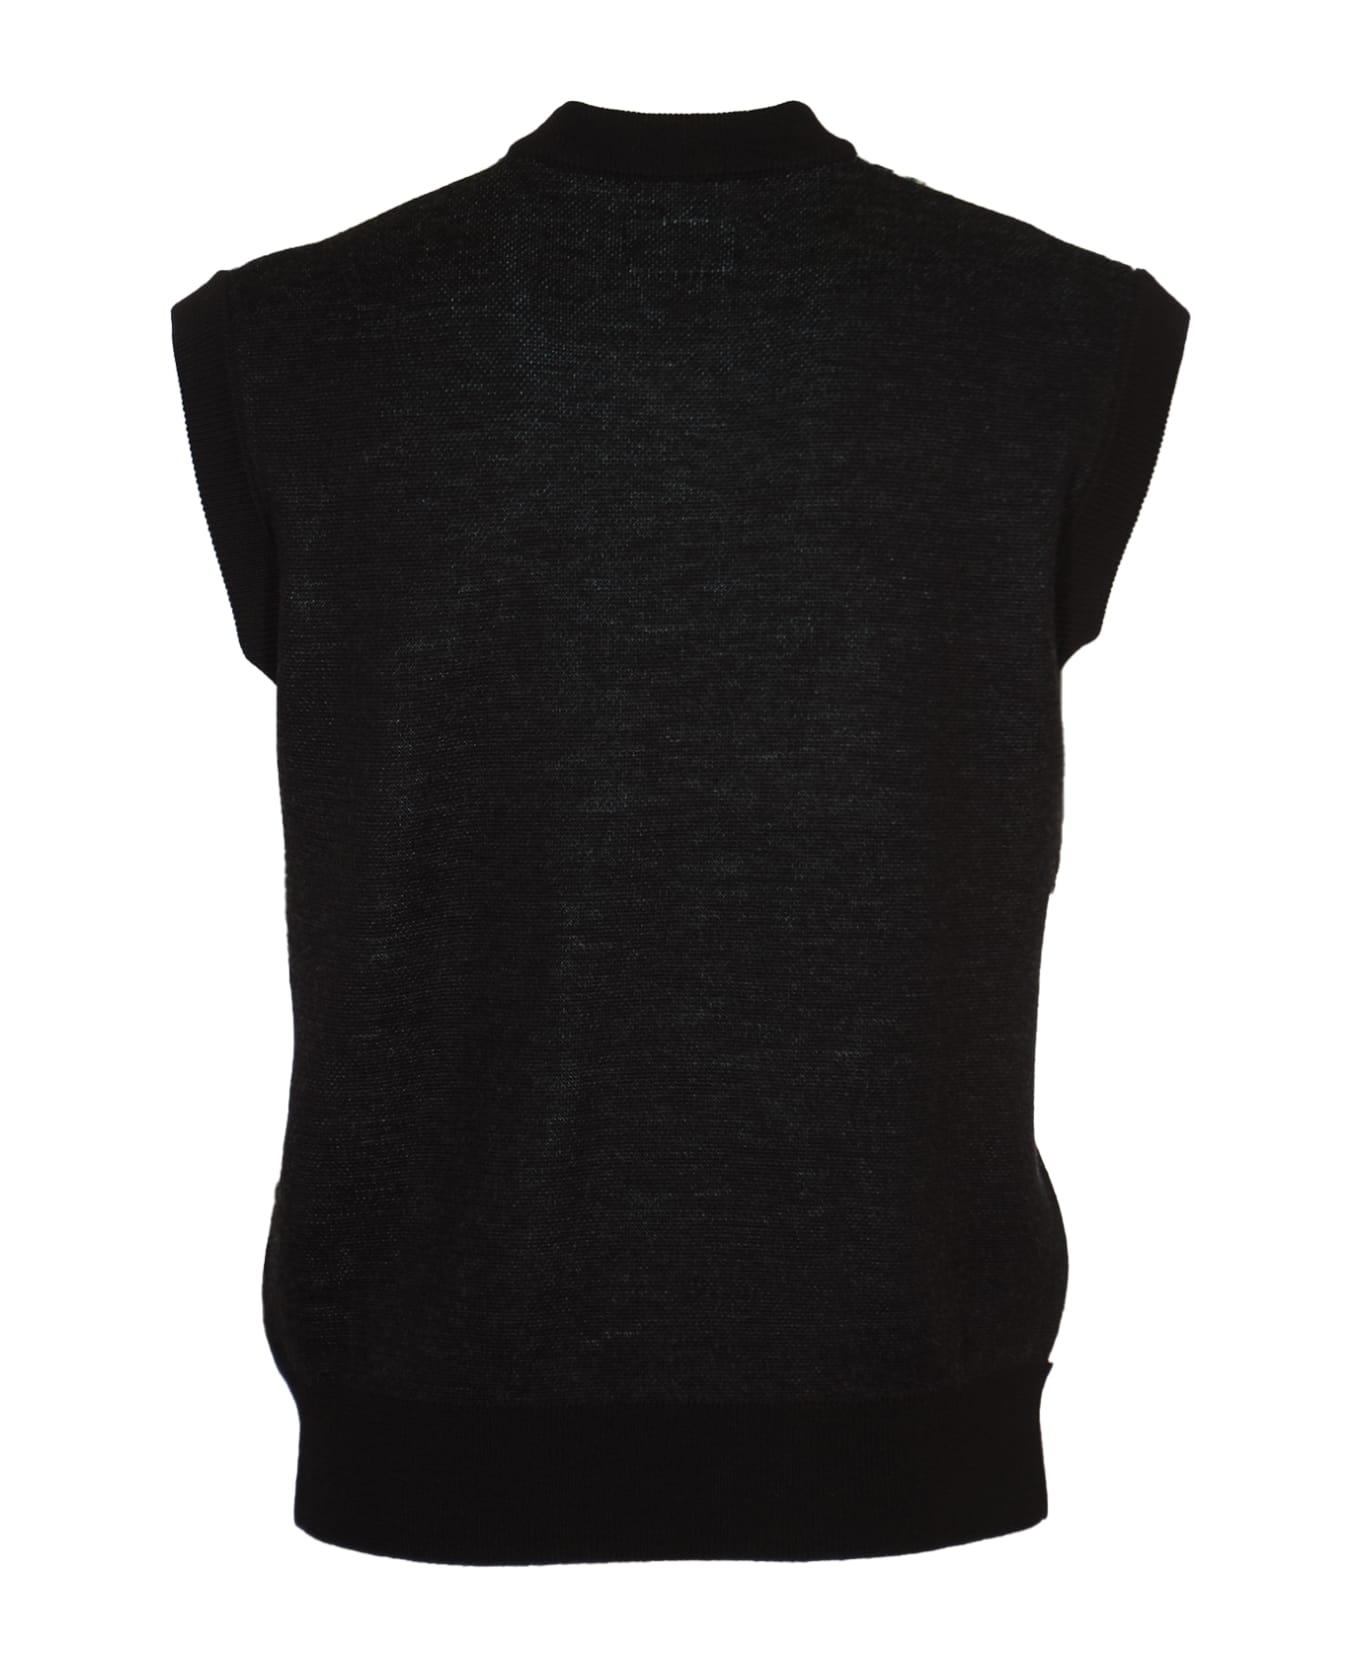 PACCBET V-neck Embroidered Sleeveless Top - Black